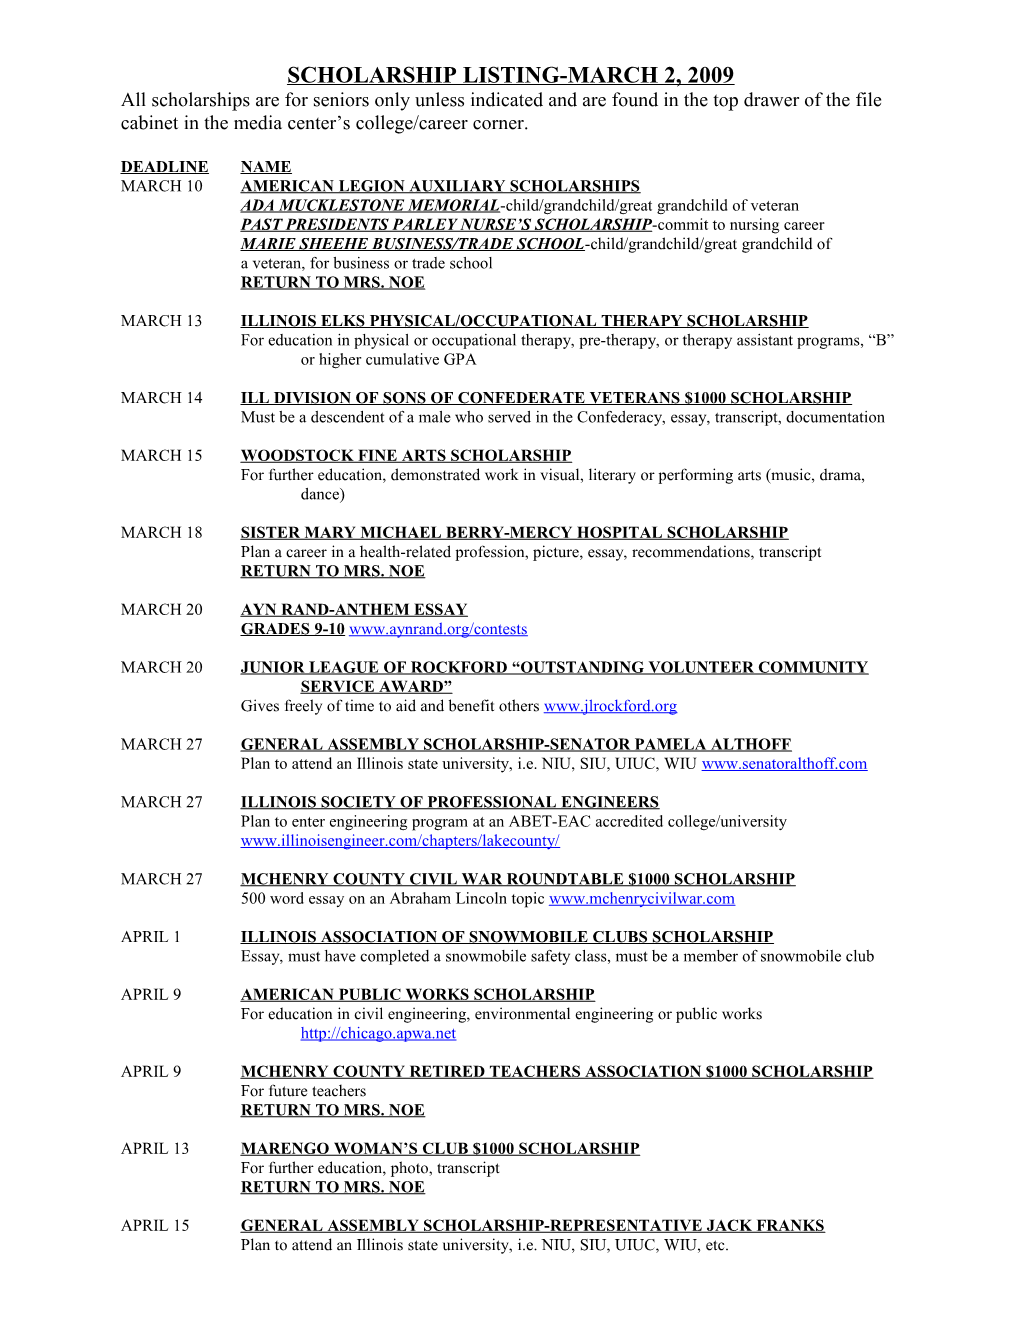 Scholarship Listing-March 2, 2009